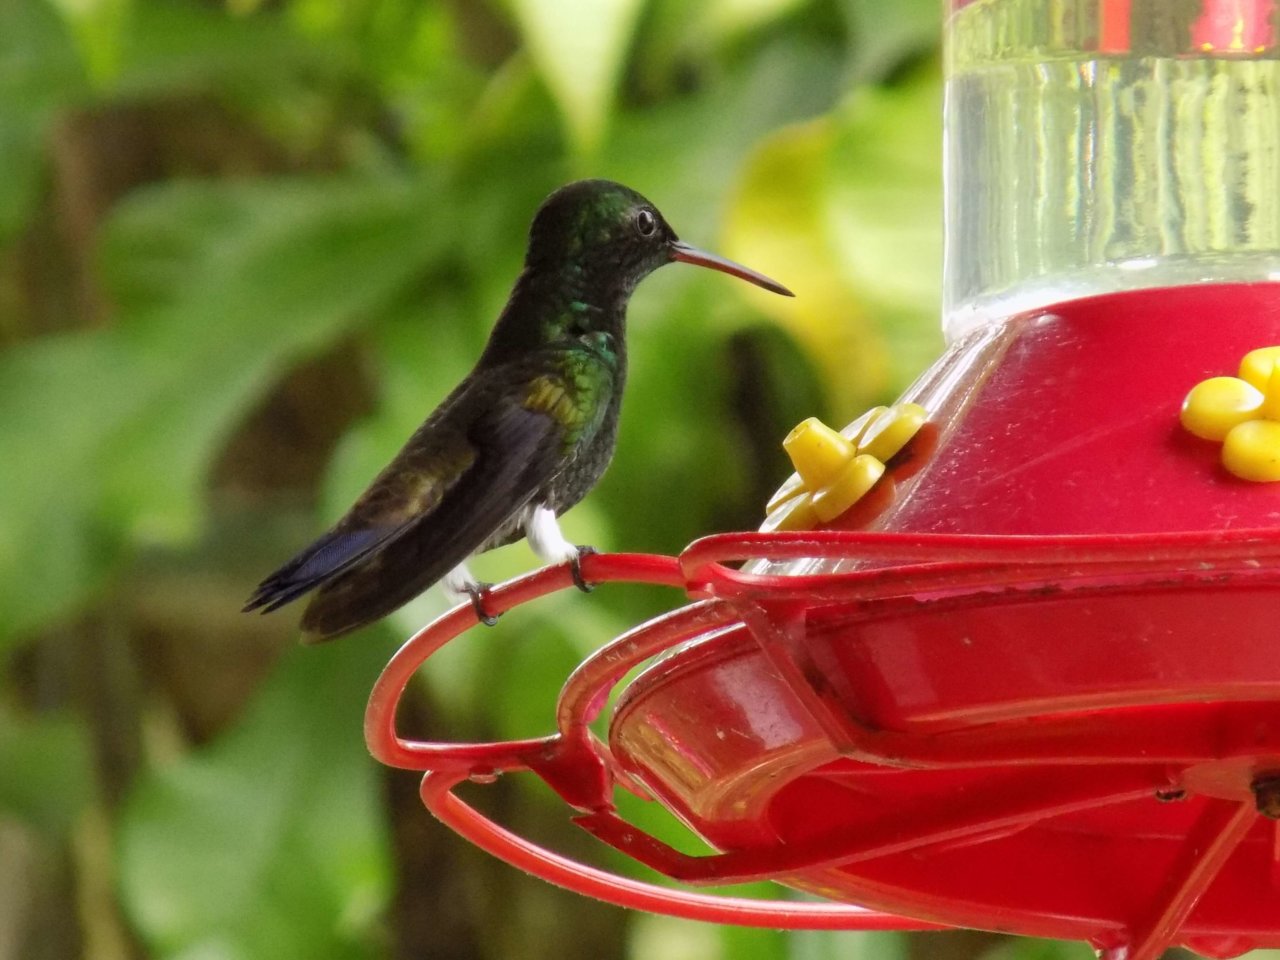 This picture shows a hummingbird standing on the edge of a hanging feeder